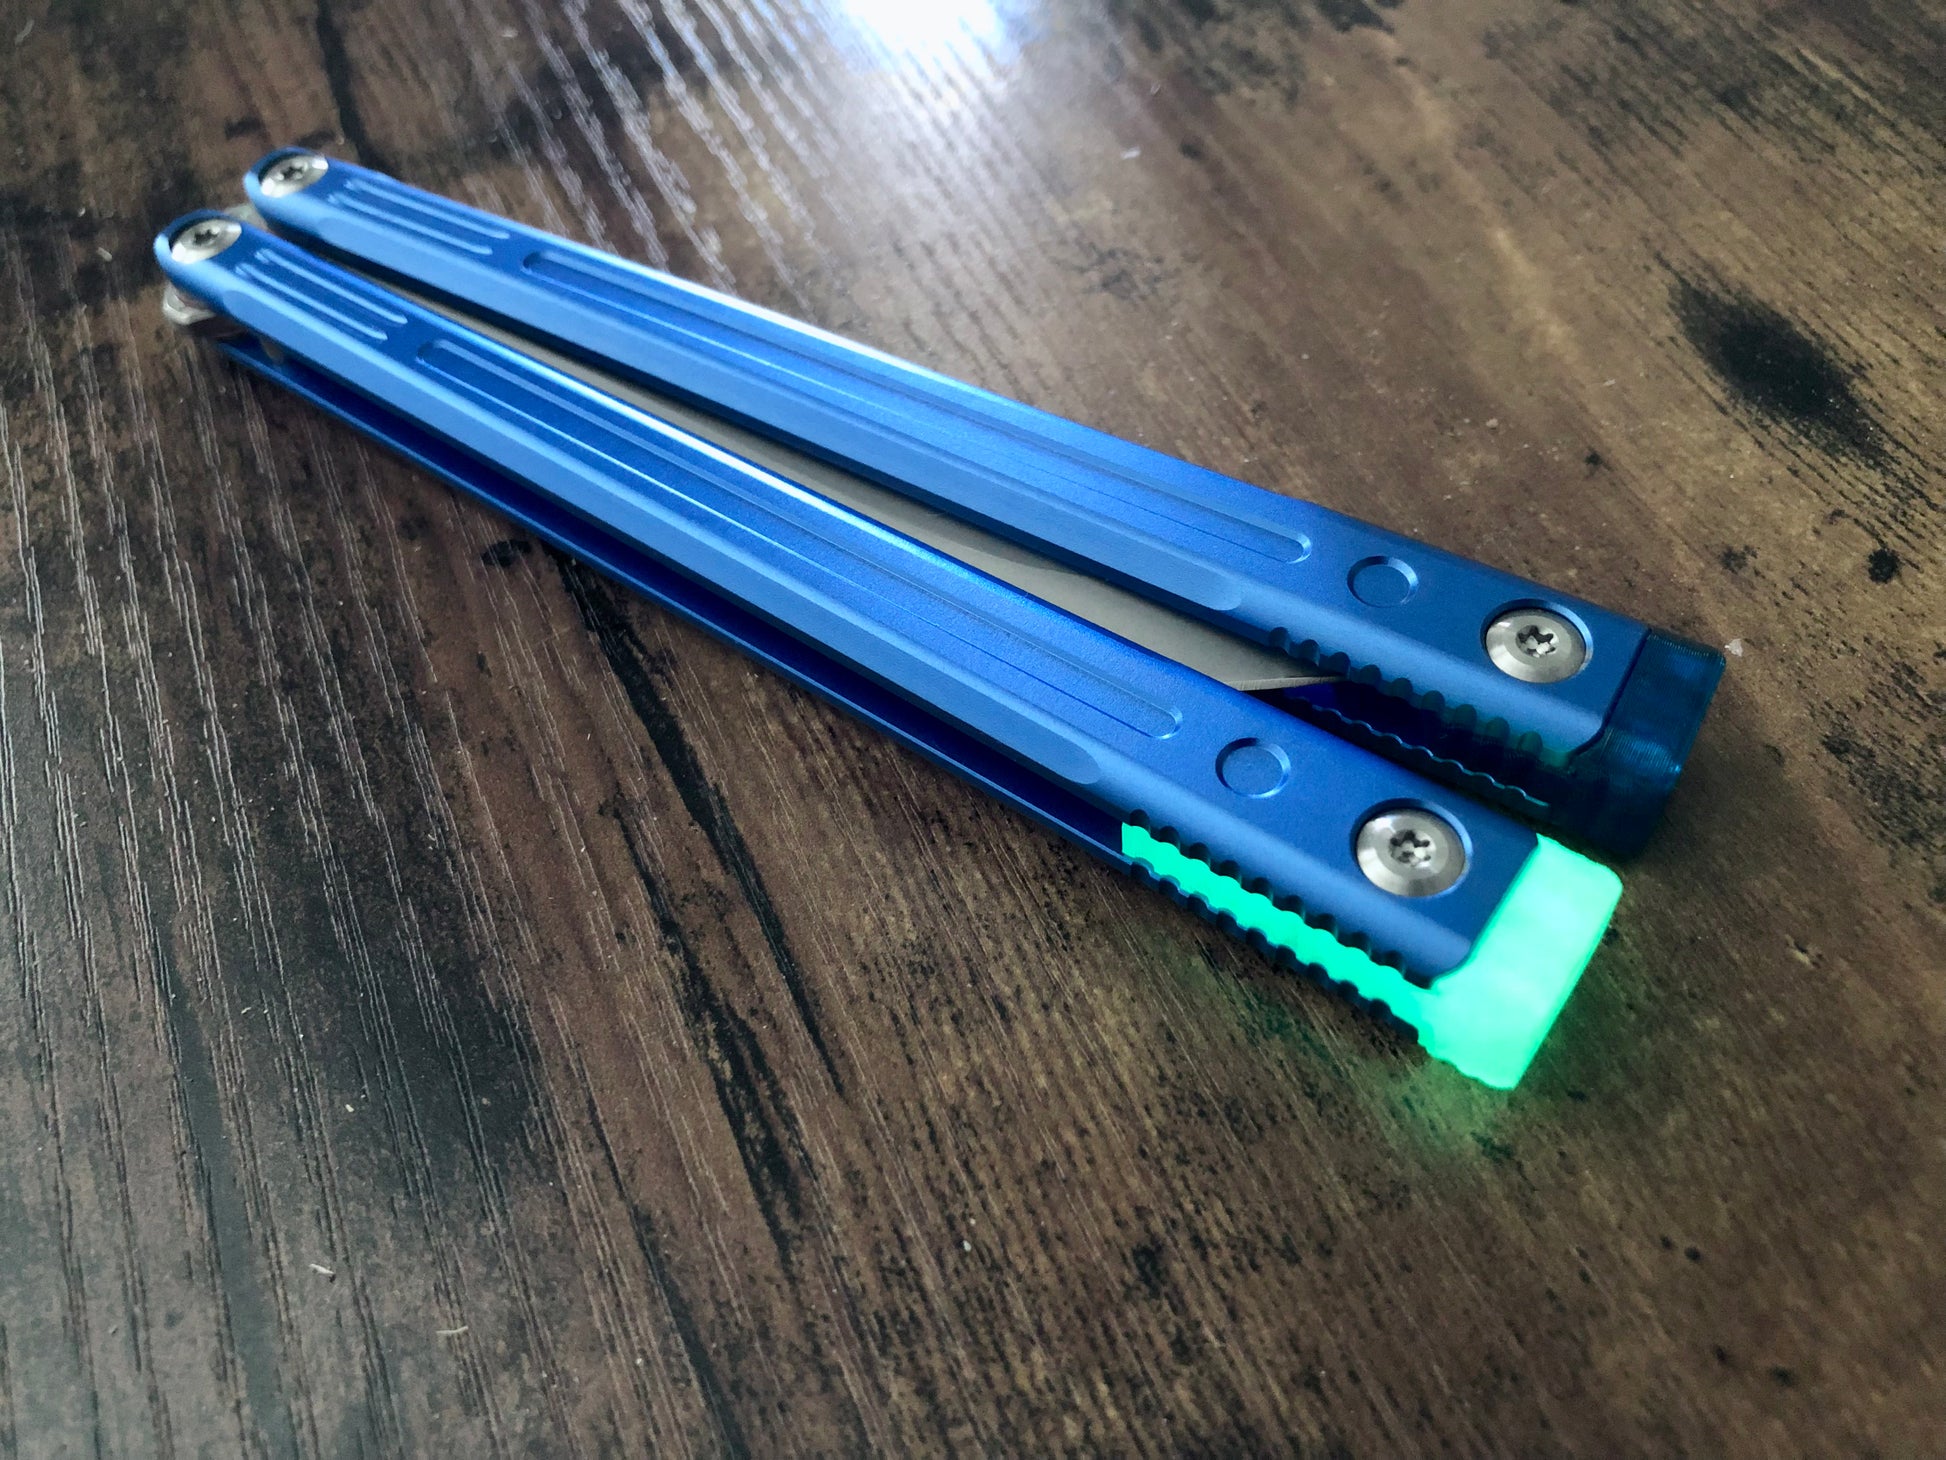 Adjust the balance, extend the handles, and add grip to your LDY balisong Cygnus and Orion flippers with Zippy extension spacers and handle inlays.